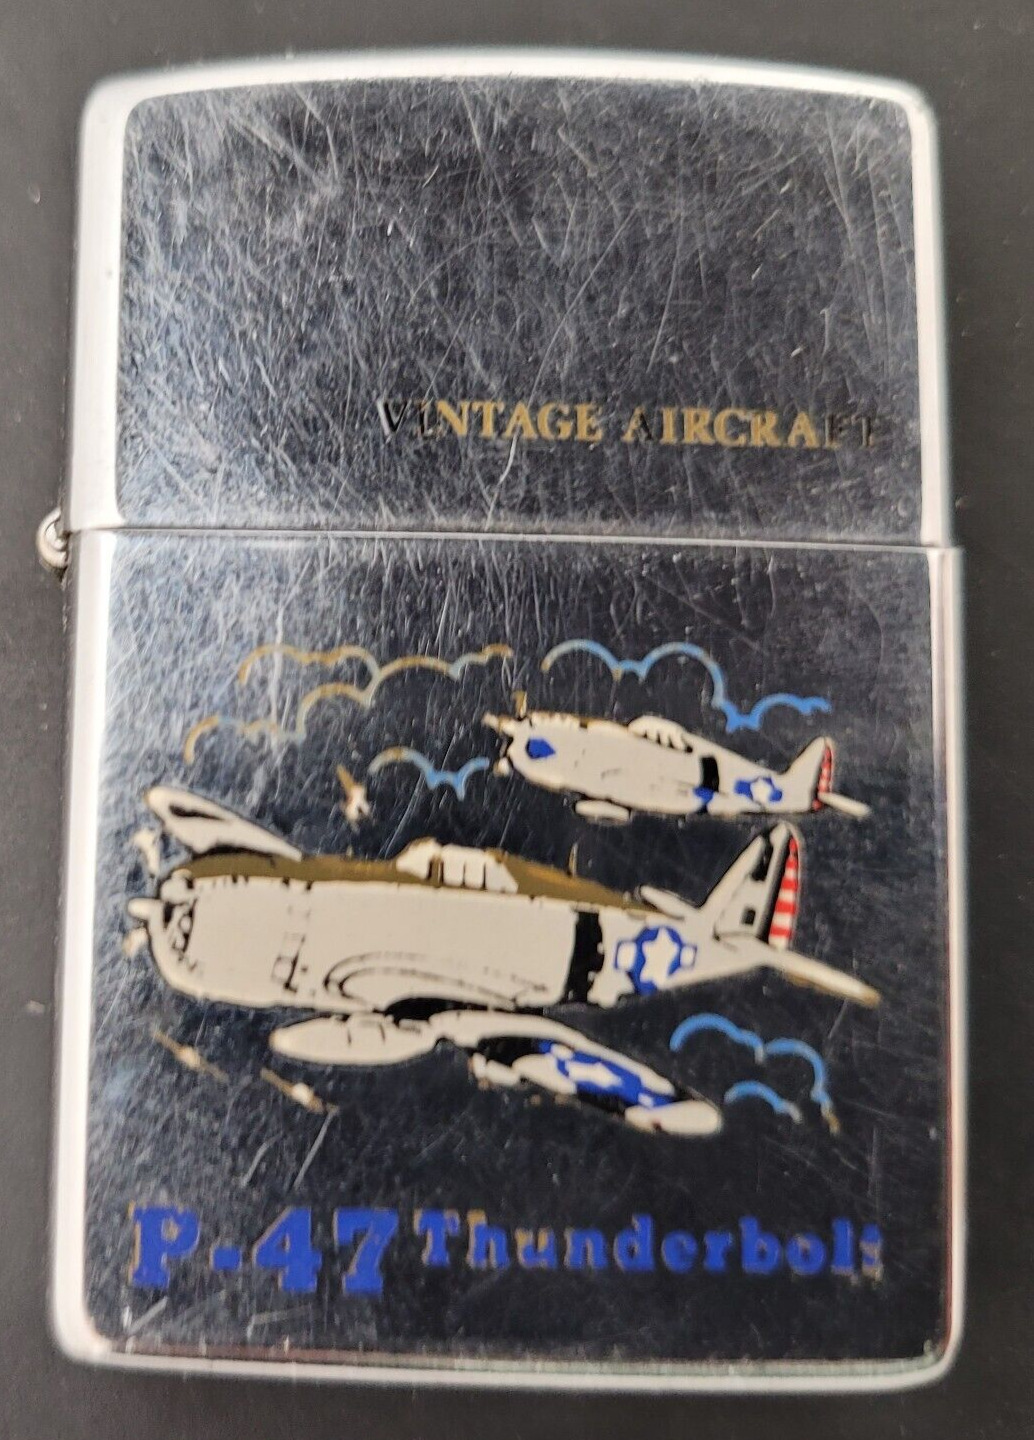 Military Aircraft P-47 Thunderbolt WWII Series Vintage Zippo Lighter